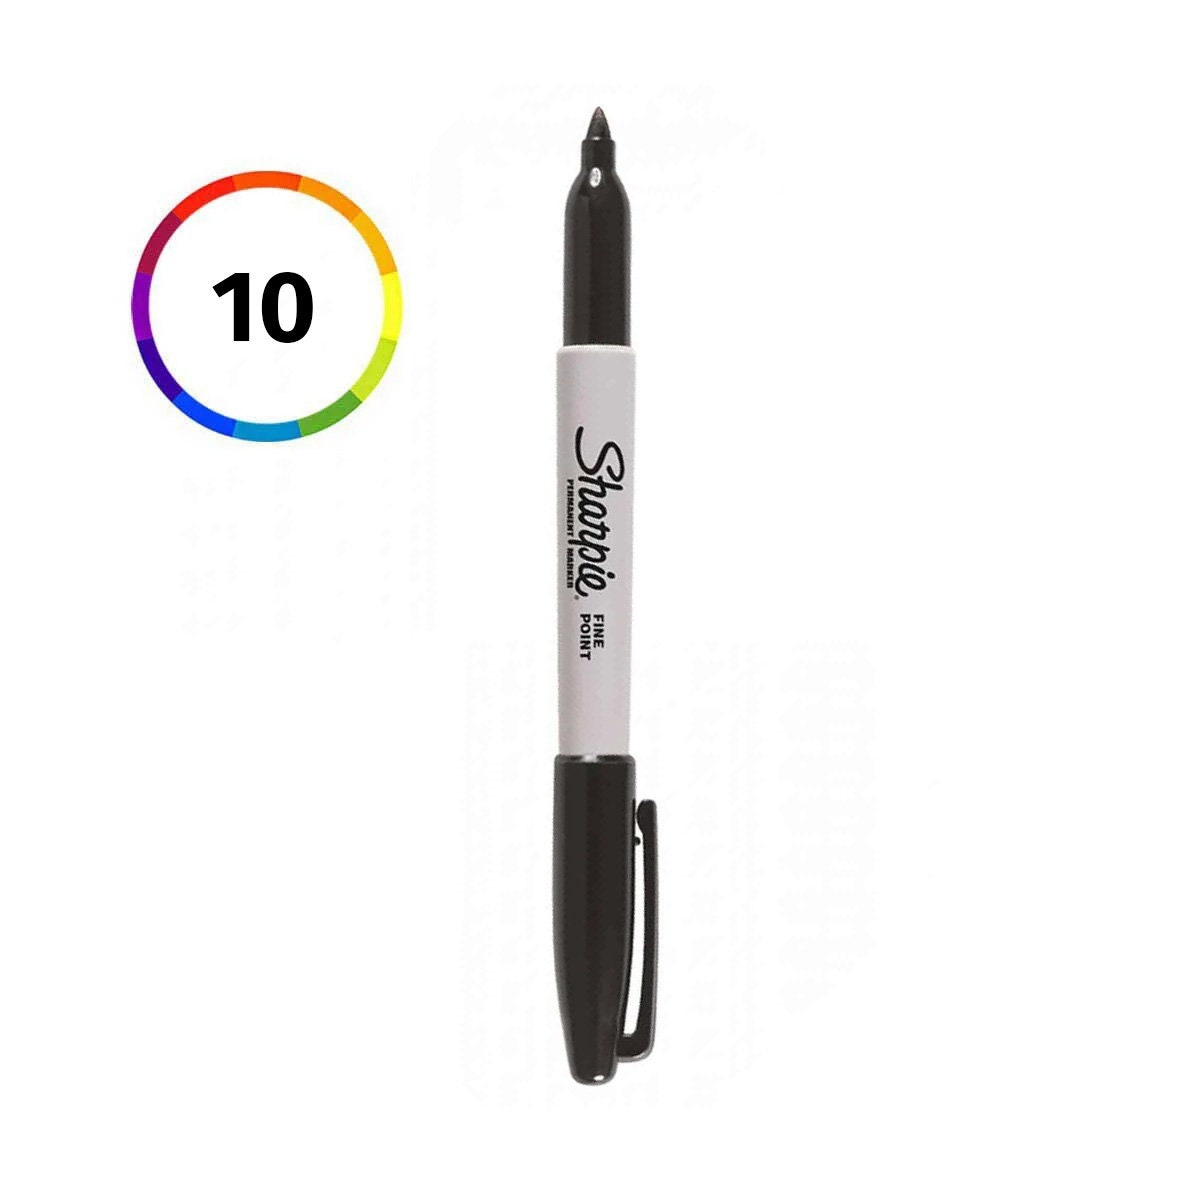 Black & White Sharpie Paint Markers Fine Point Oil Based; One Each of Extra  Fine, Fine, Medium, Bold Point, Tip; Sharpie Paint Markers, Pens